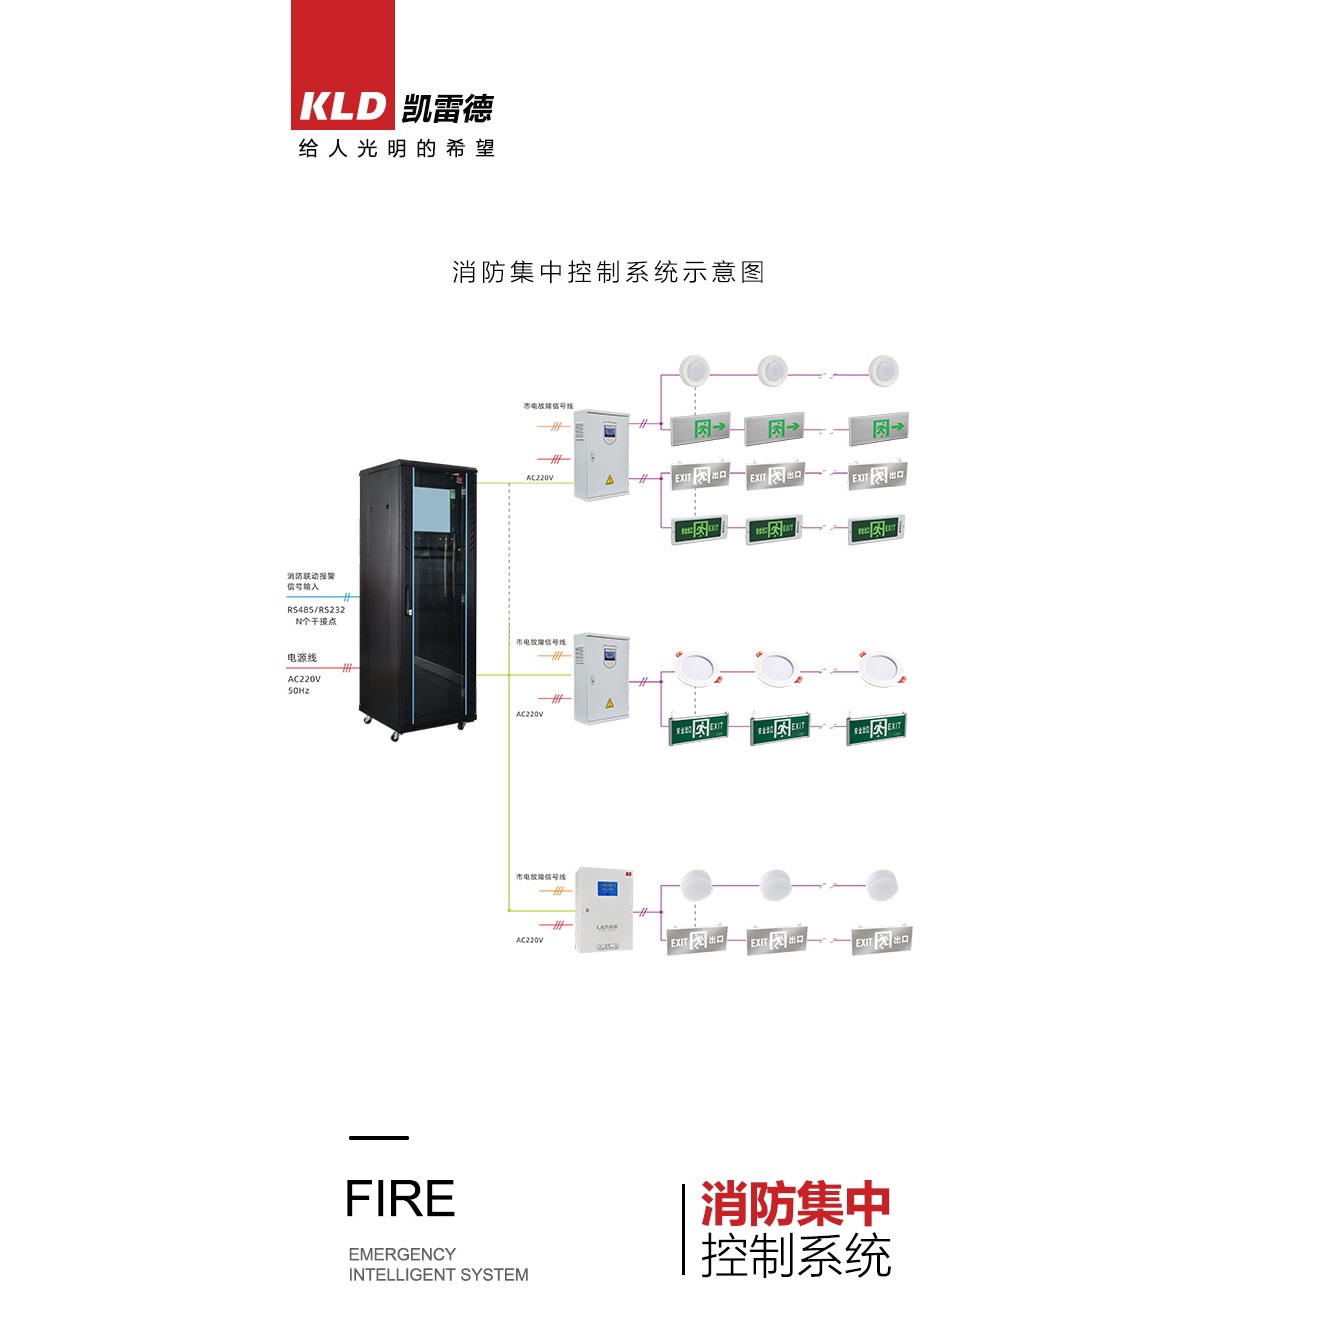 Centralized fire control system